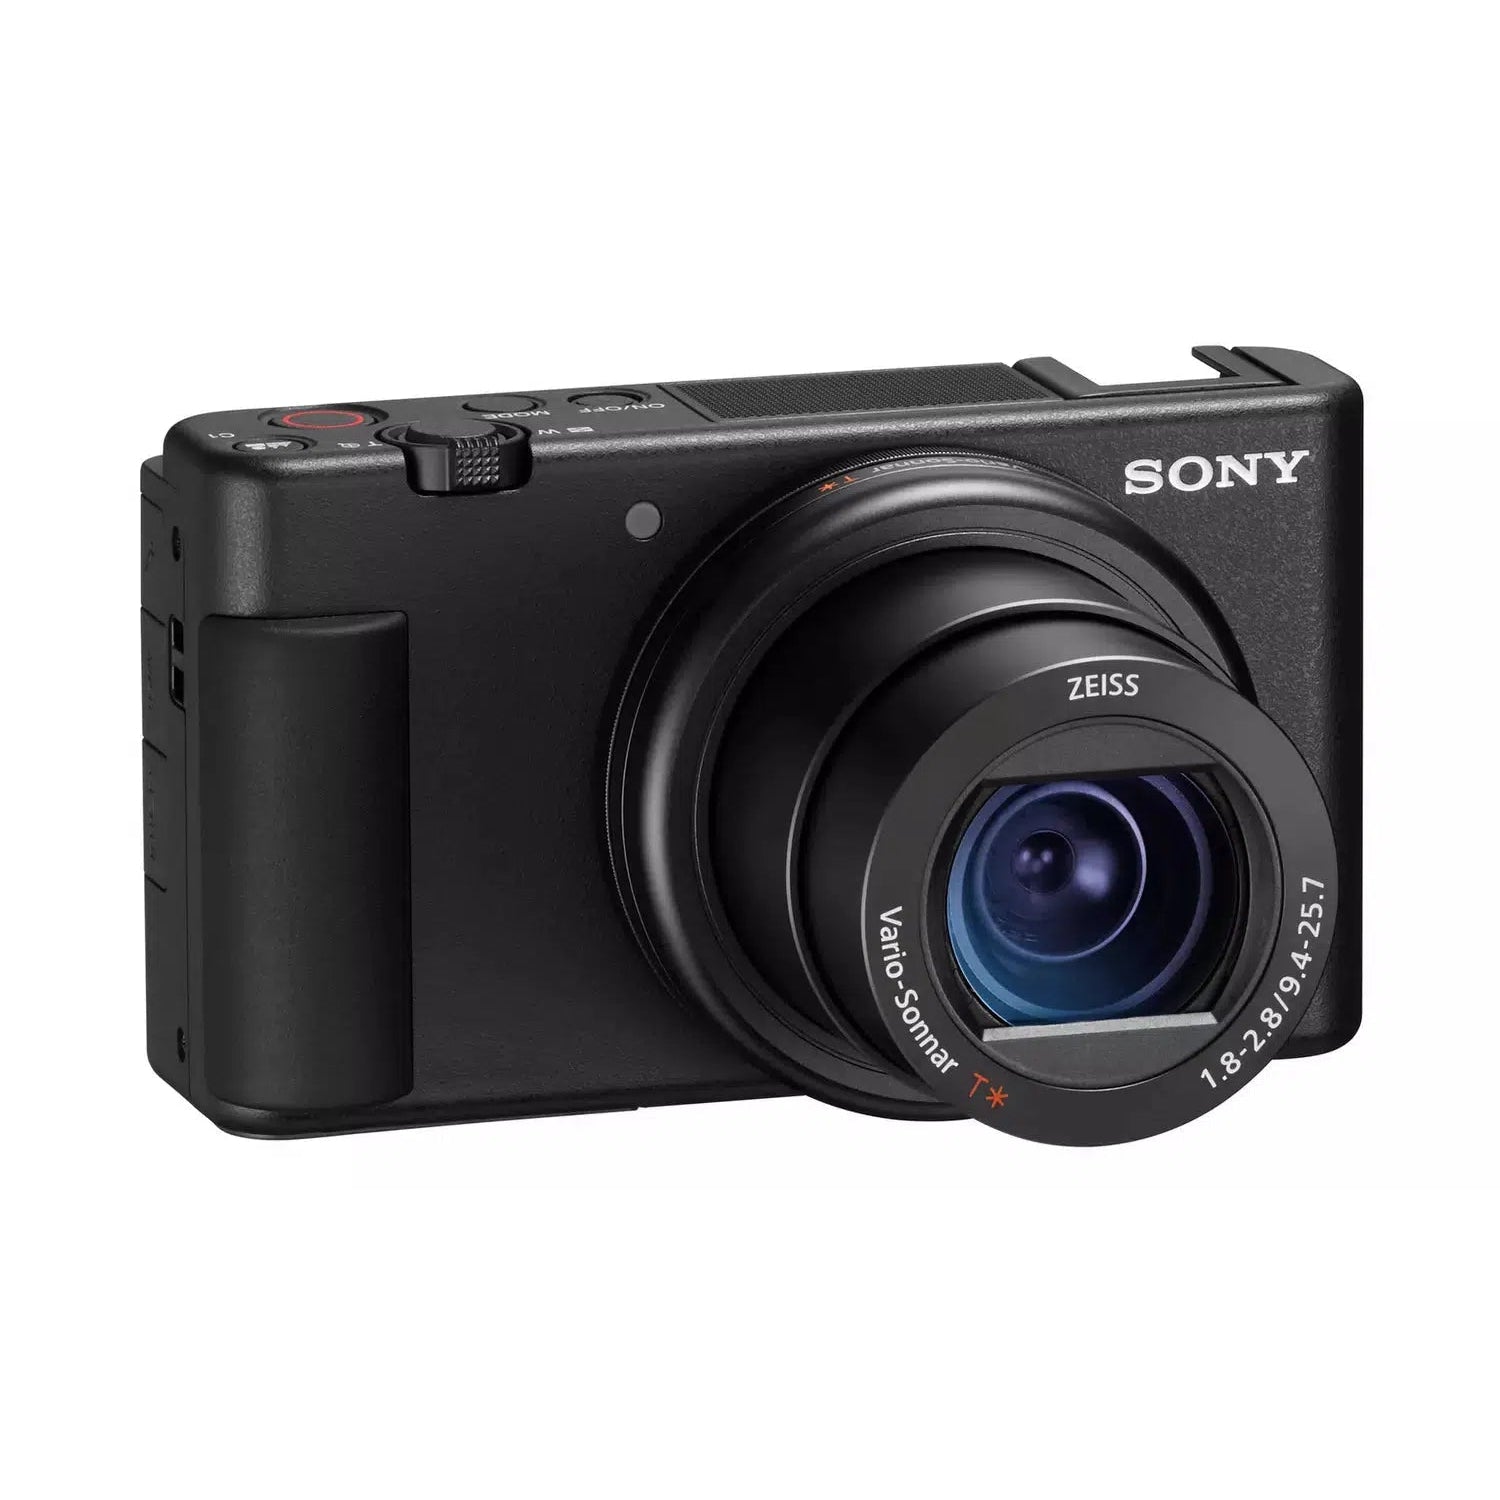 Sony ZV-1 Compact Vlogging Camera with 24-70mm Lens - Black - Pristine - With Charger